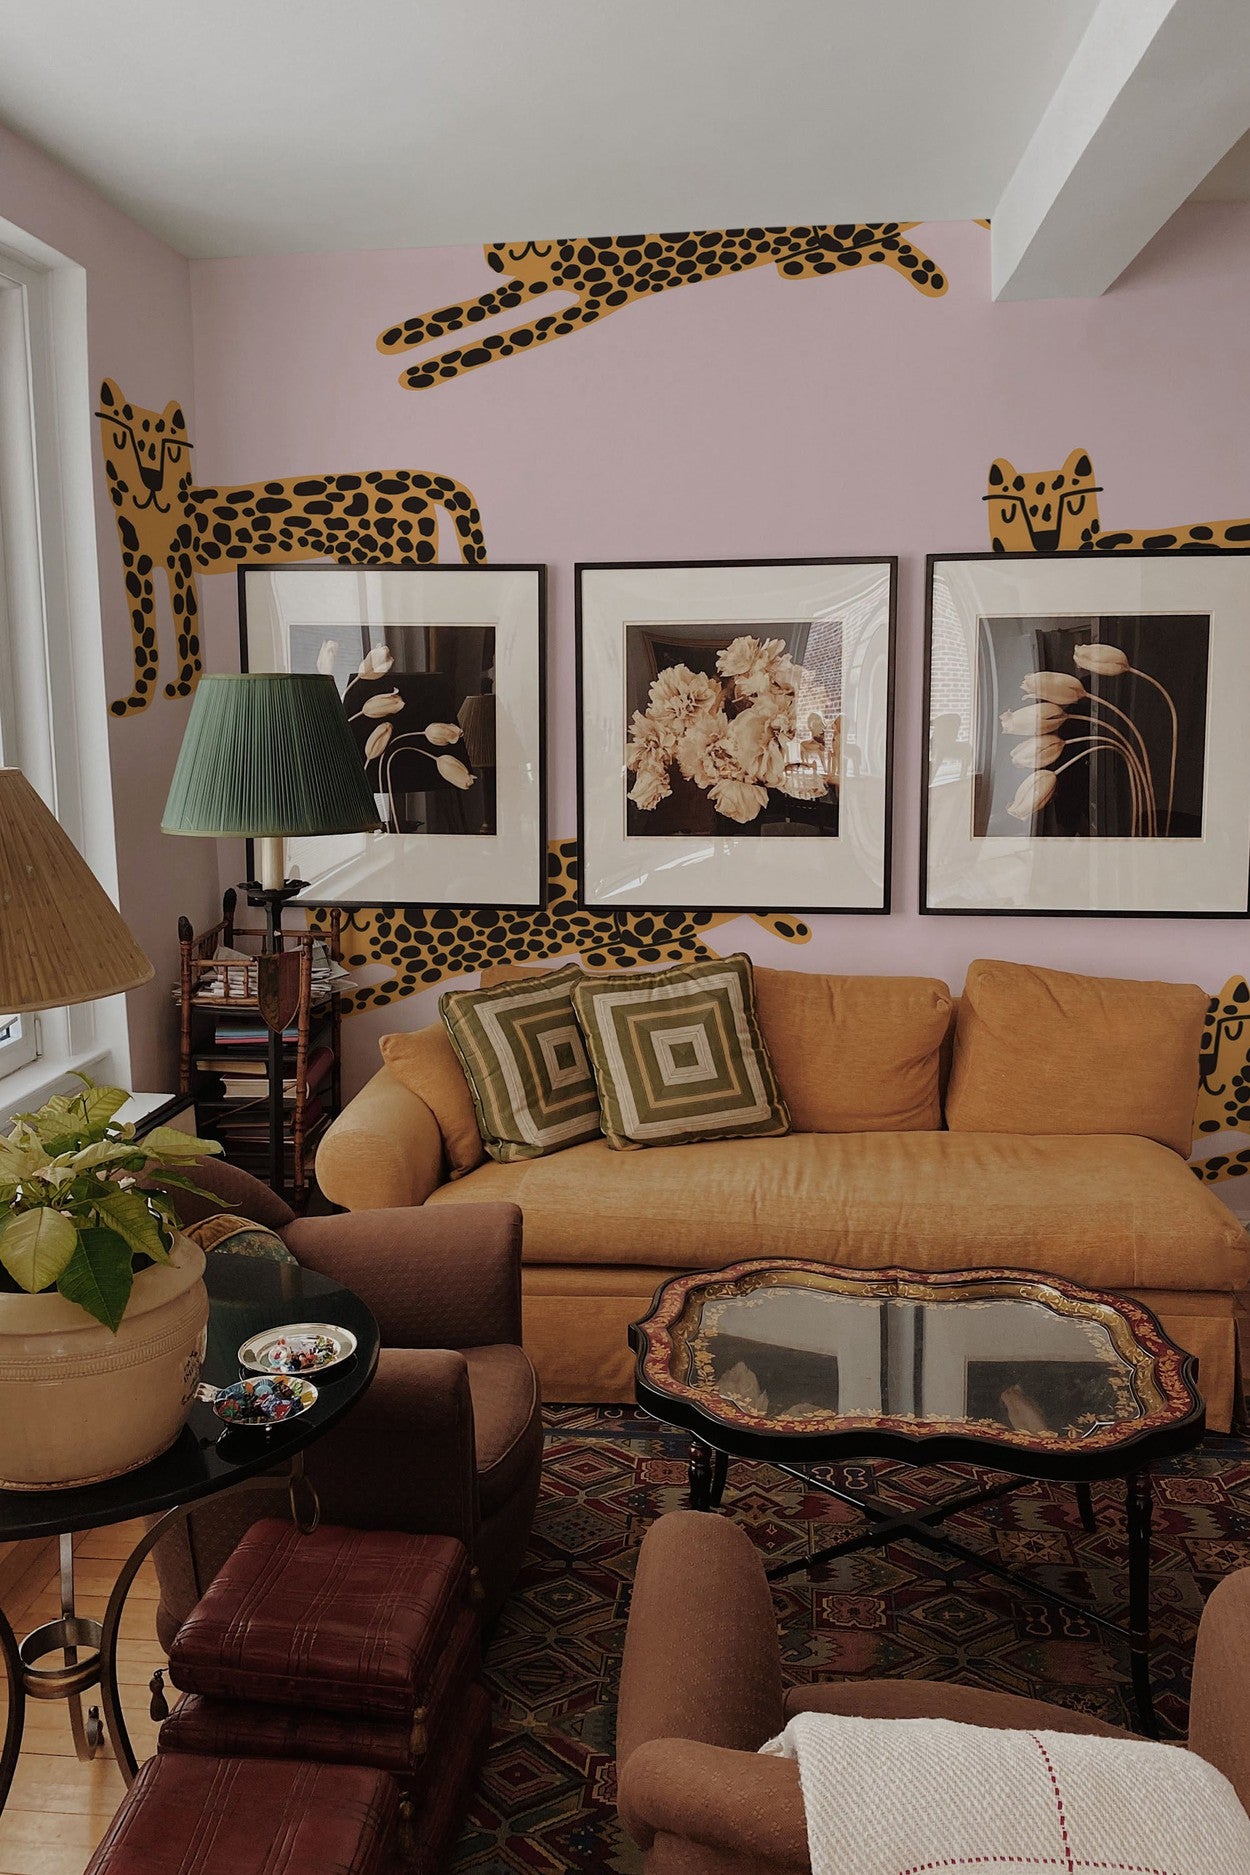 A cozy living room interior with cheetah print mural accents on the walls and a warm-toned decor.